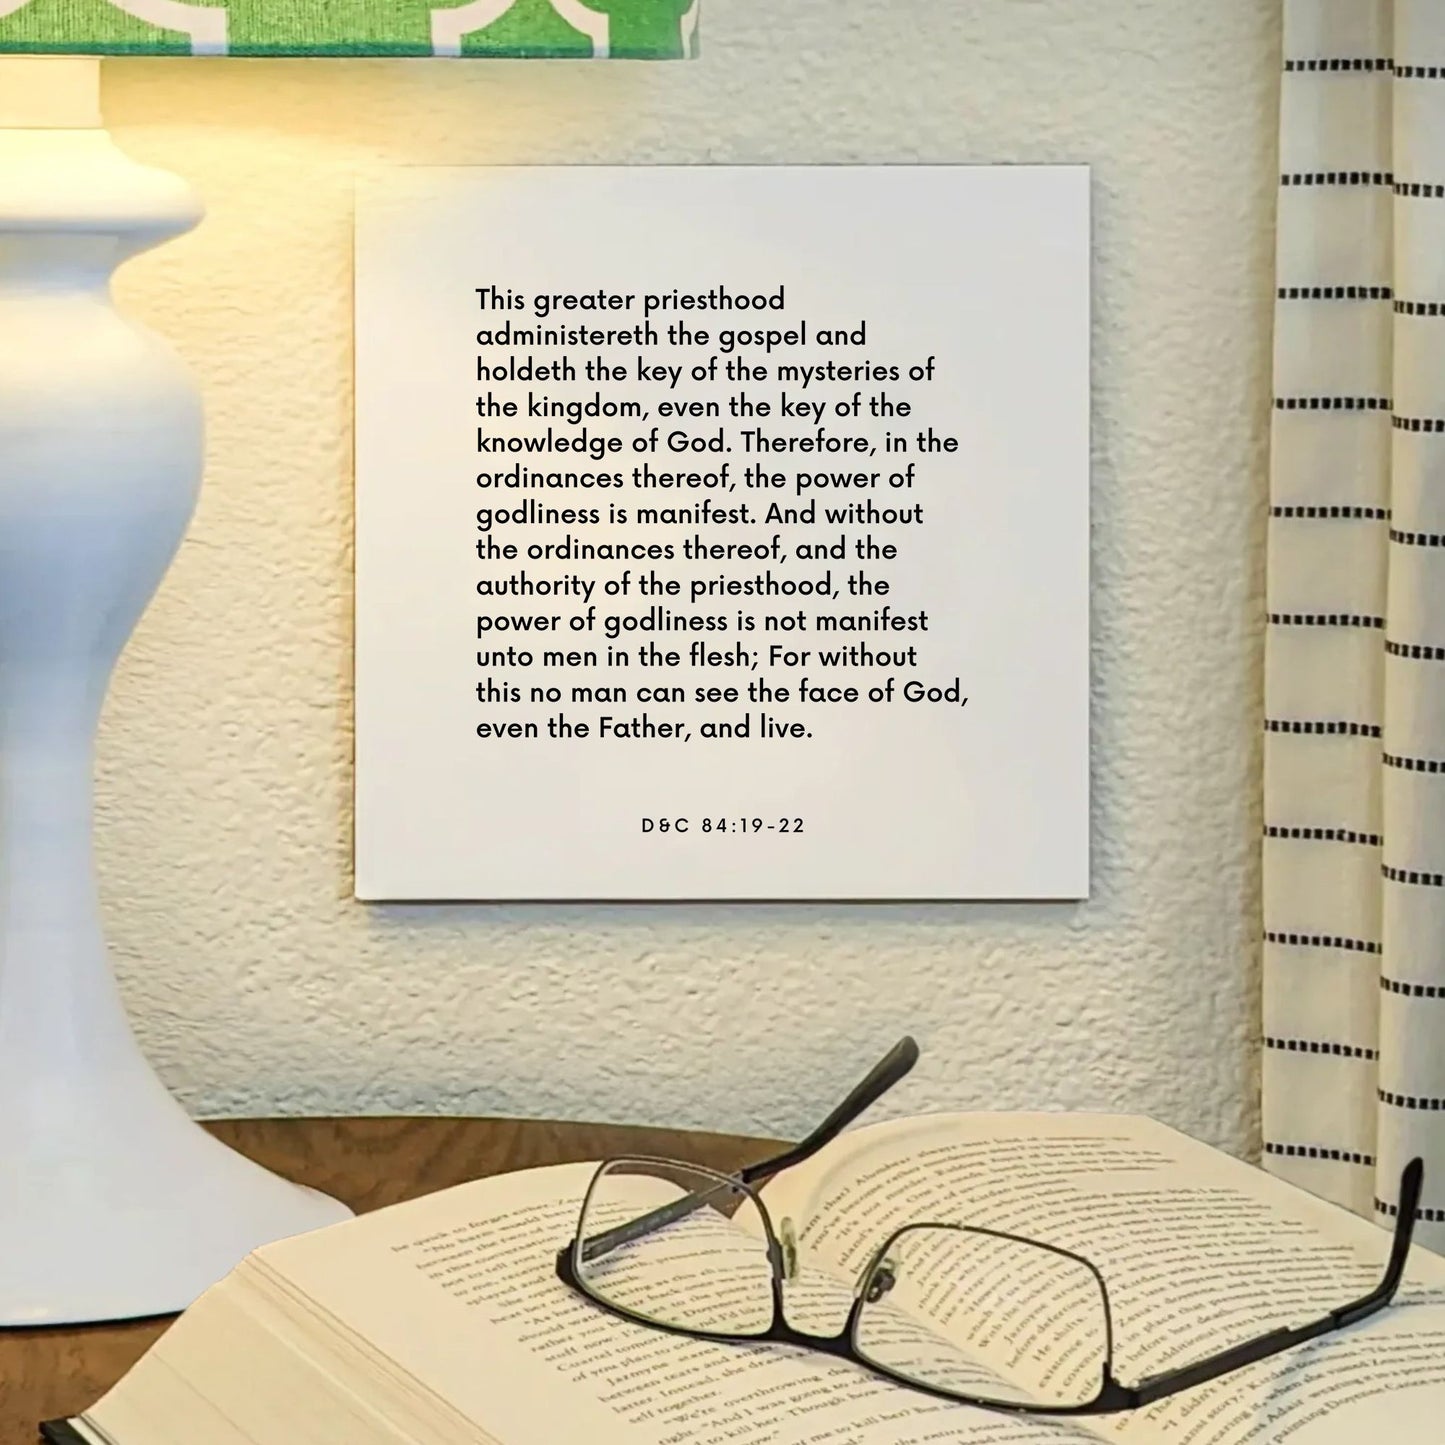 Lamp mouting of the scripture tile for D&C 84:19-22 - "In the ordinances thereof, the power of godliness is manifest"